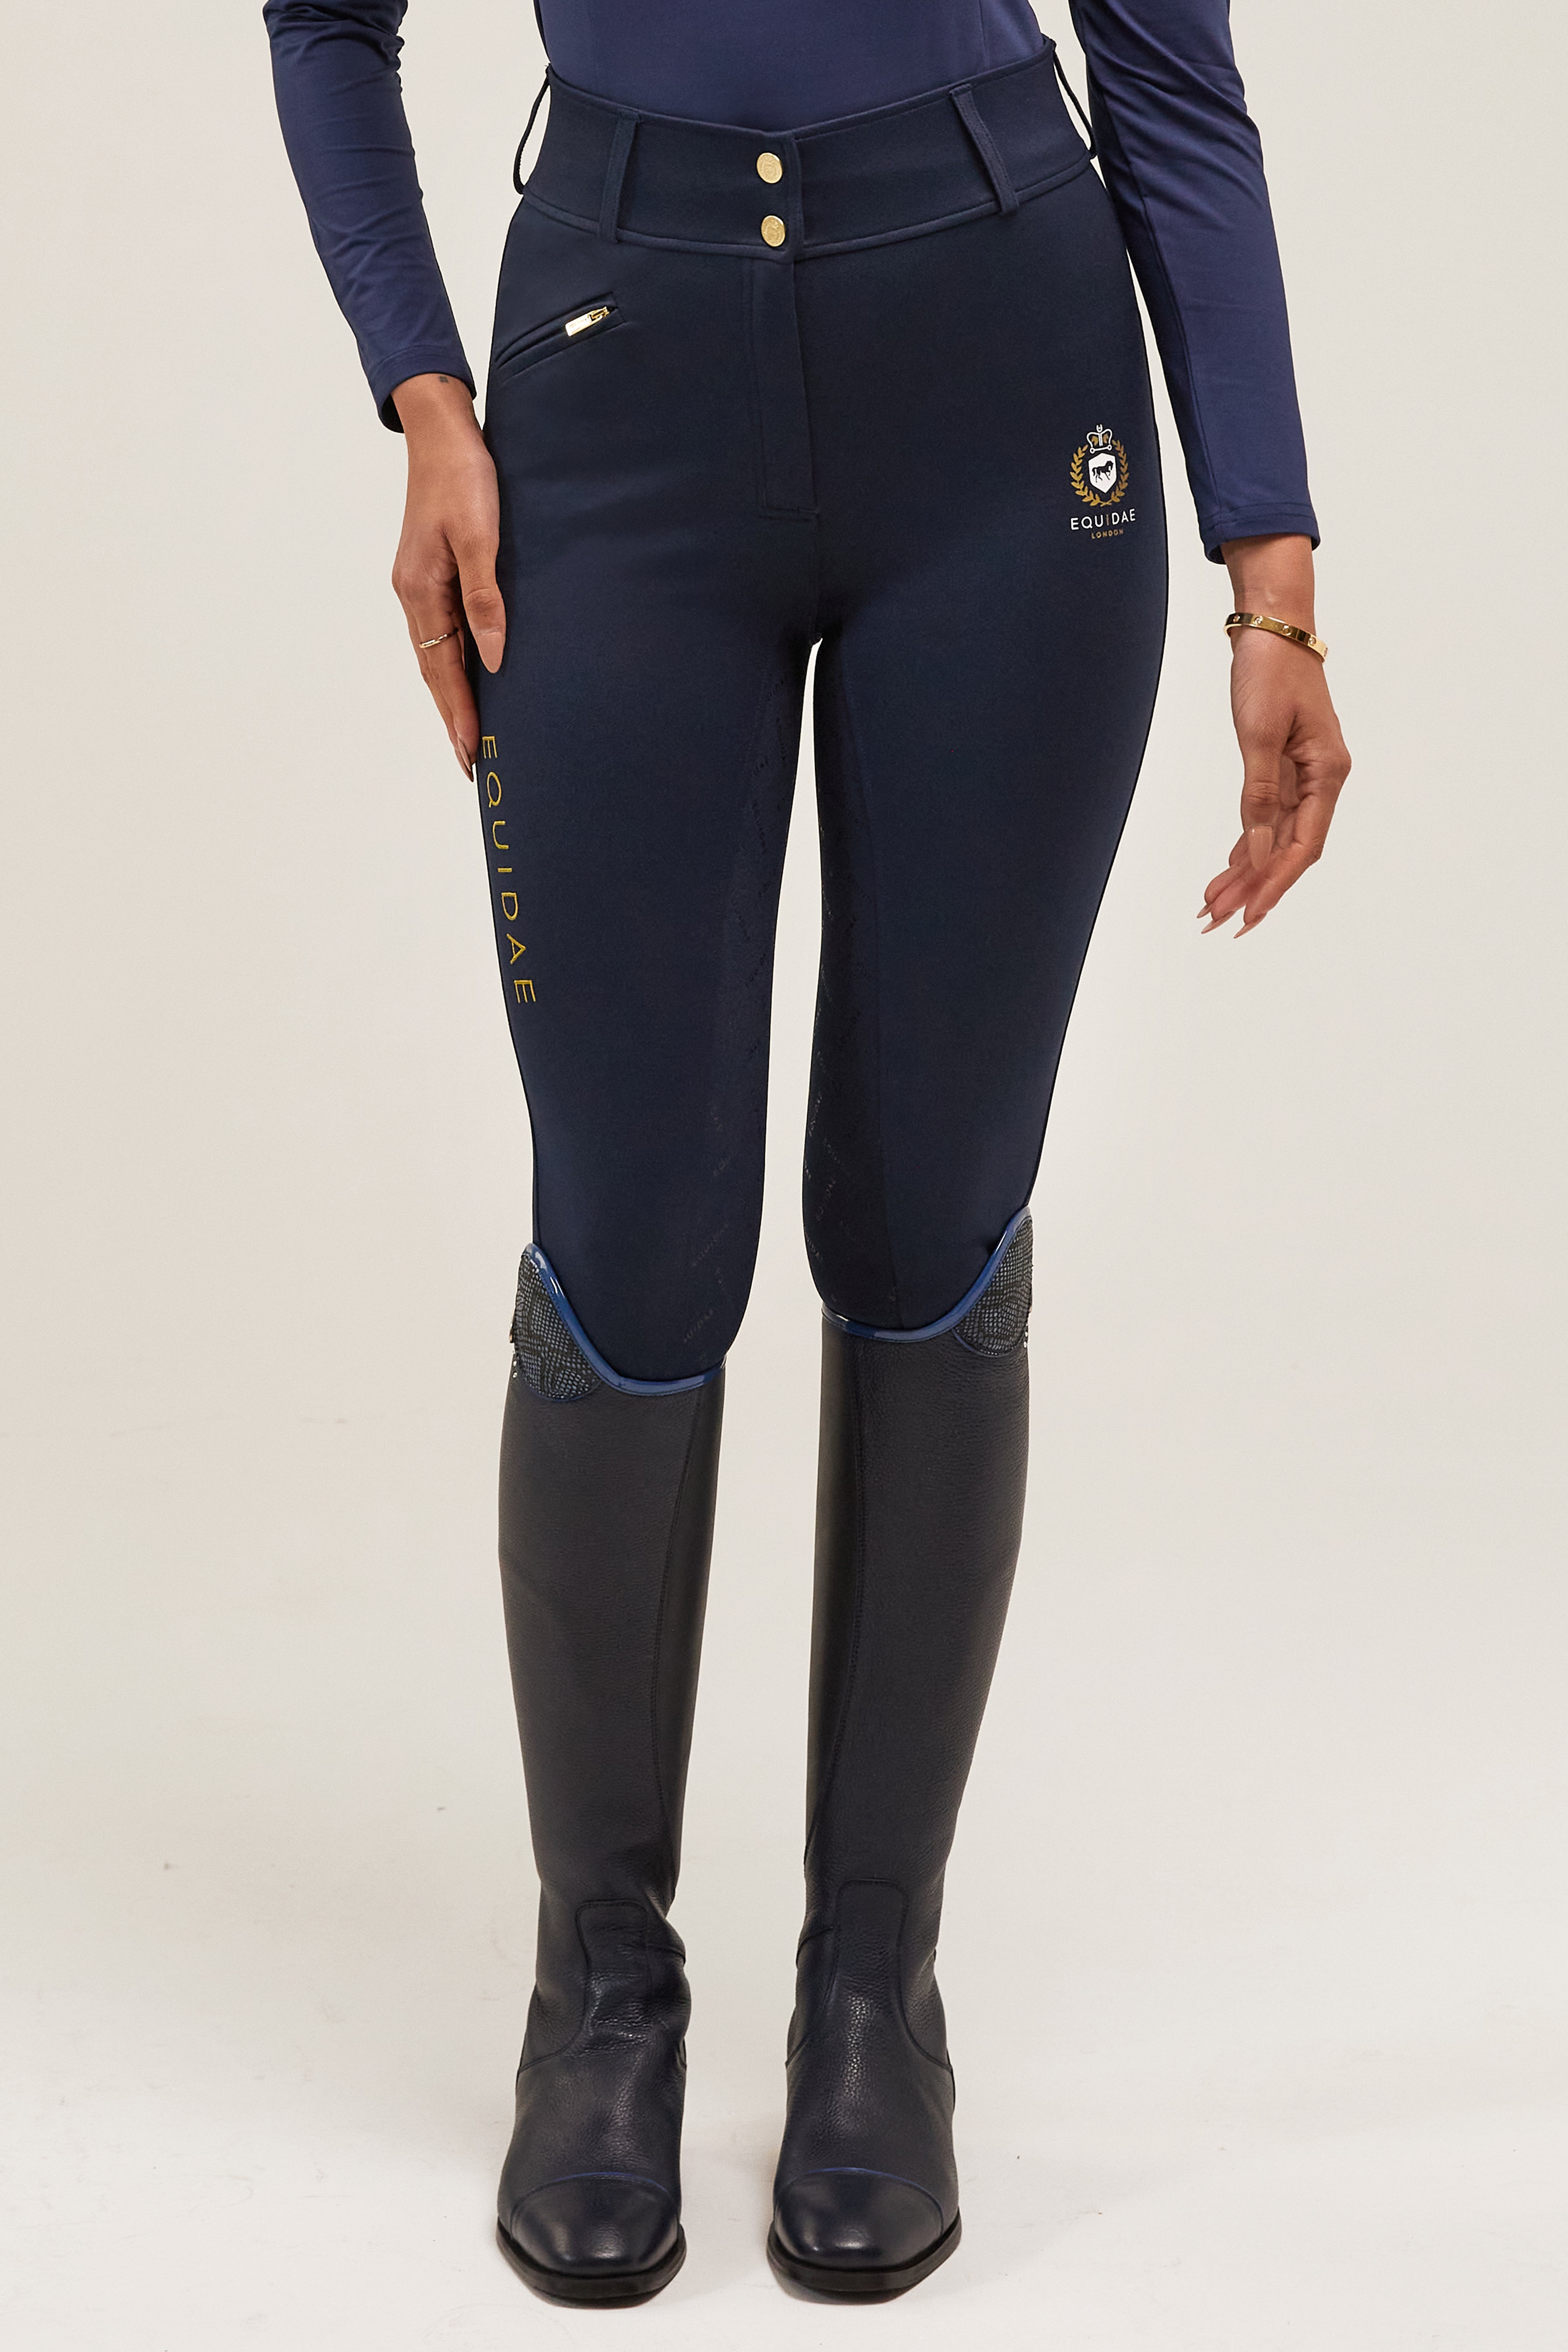 SOPHIE High Rise Full Seat Breeches in Navy – Equidae London